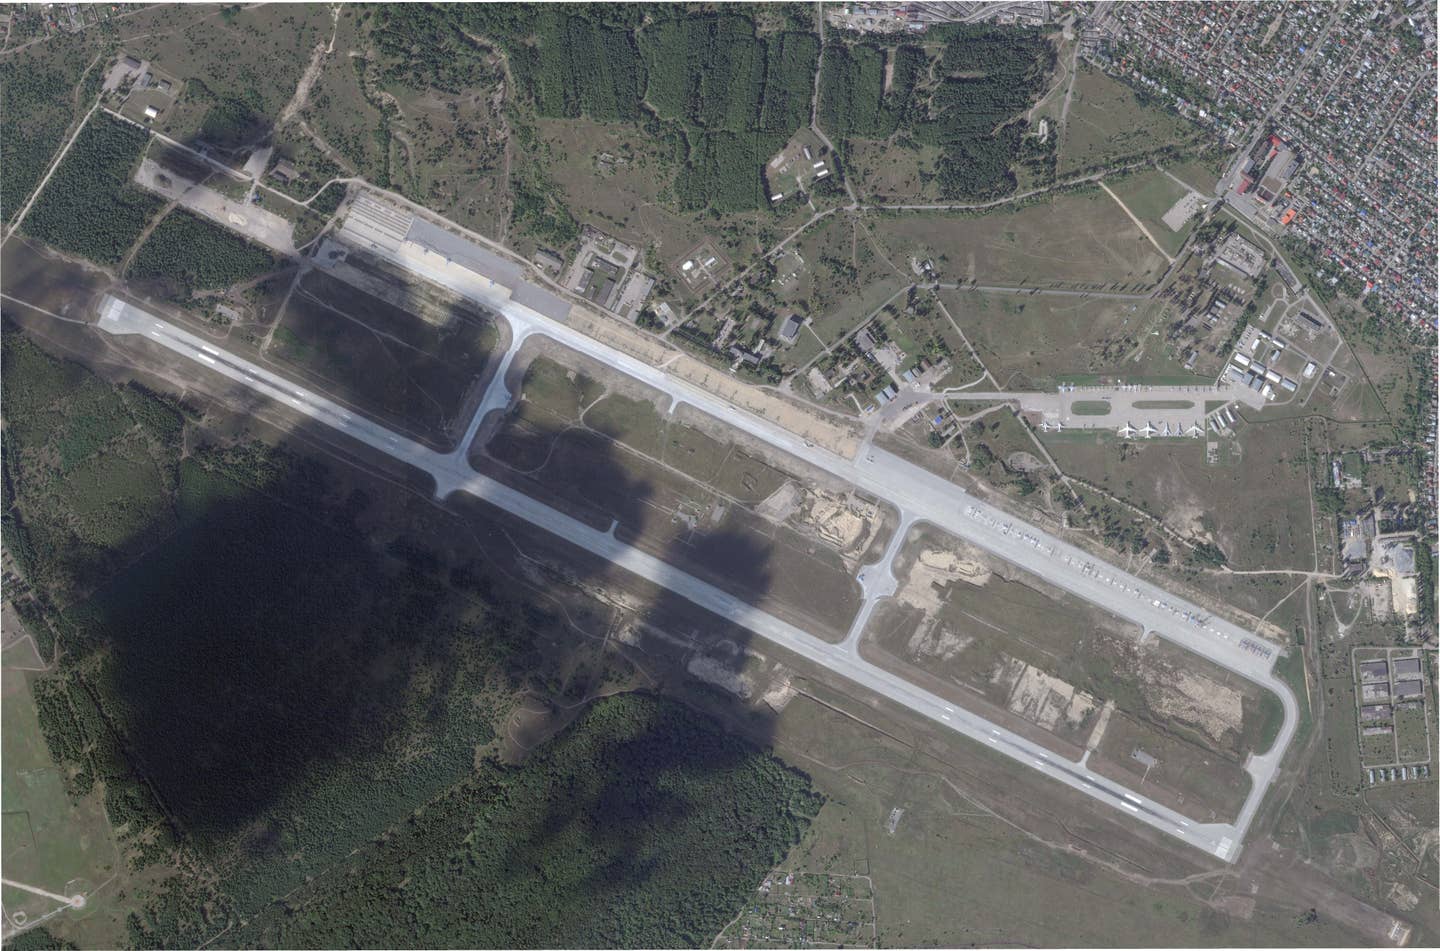 A wider-angle view of Voronezh Malshevo Air Base near Voronezh in southern Russia. PHOTO © 2023 PLANET LABS INC. ALL RIGHTS RESERVED. REPRINTED BY PERMISSION